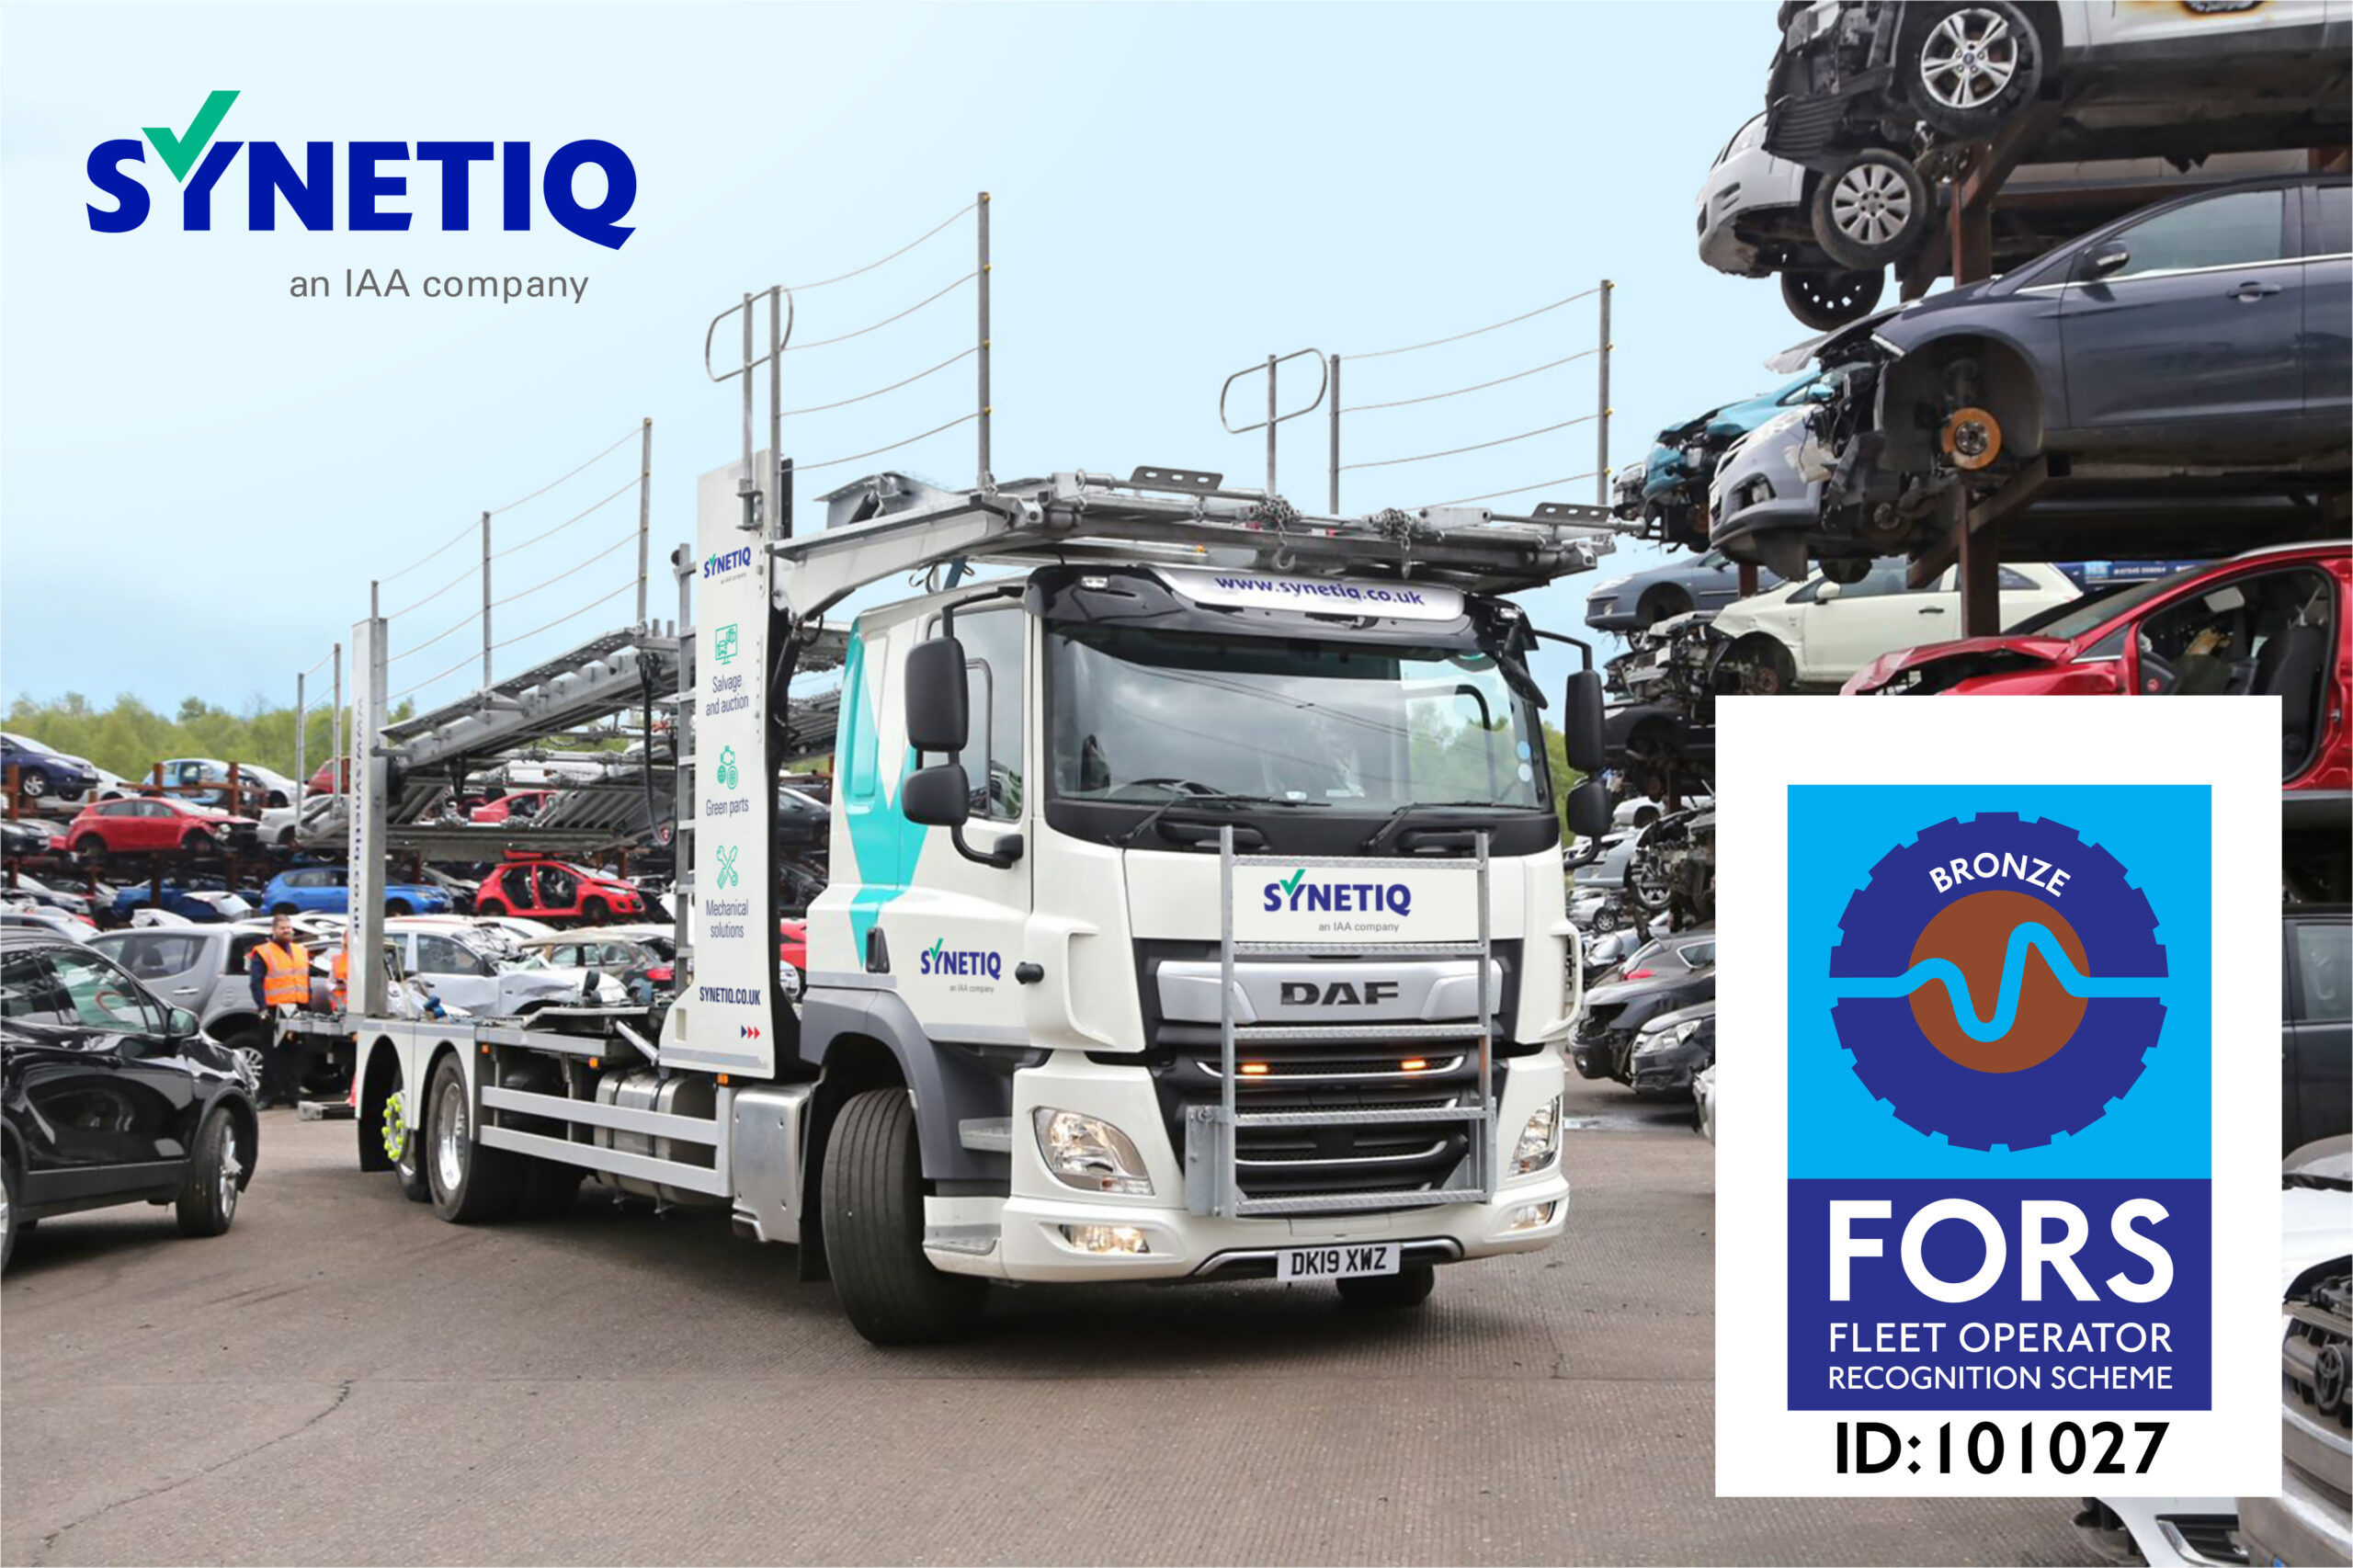 SYNETIQ promotes best practice through FORS accreditation